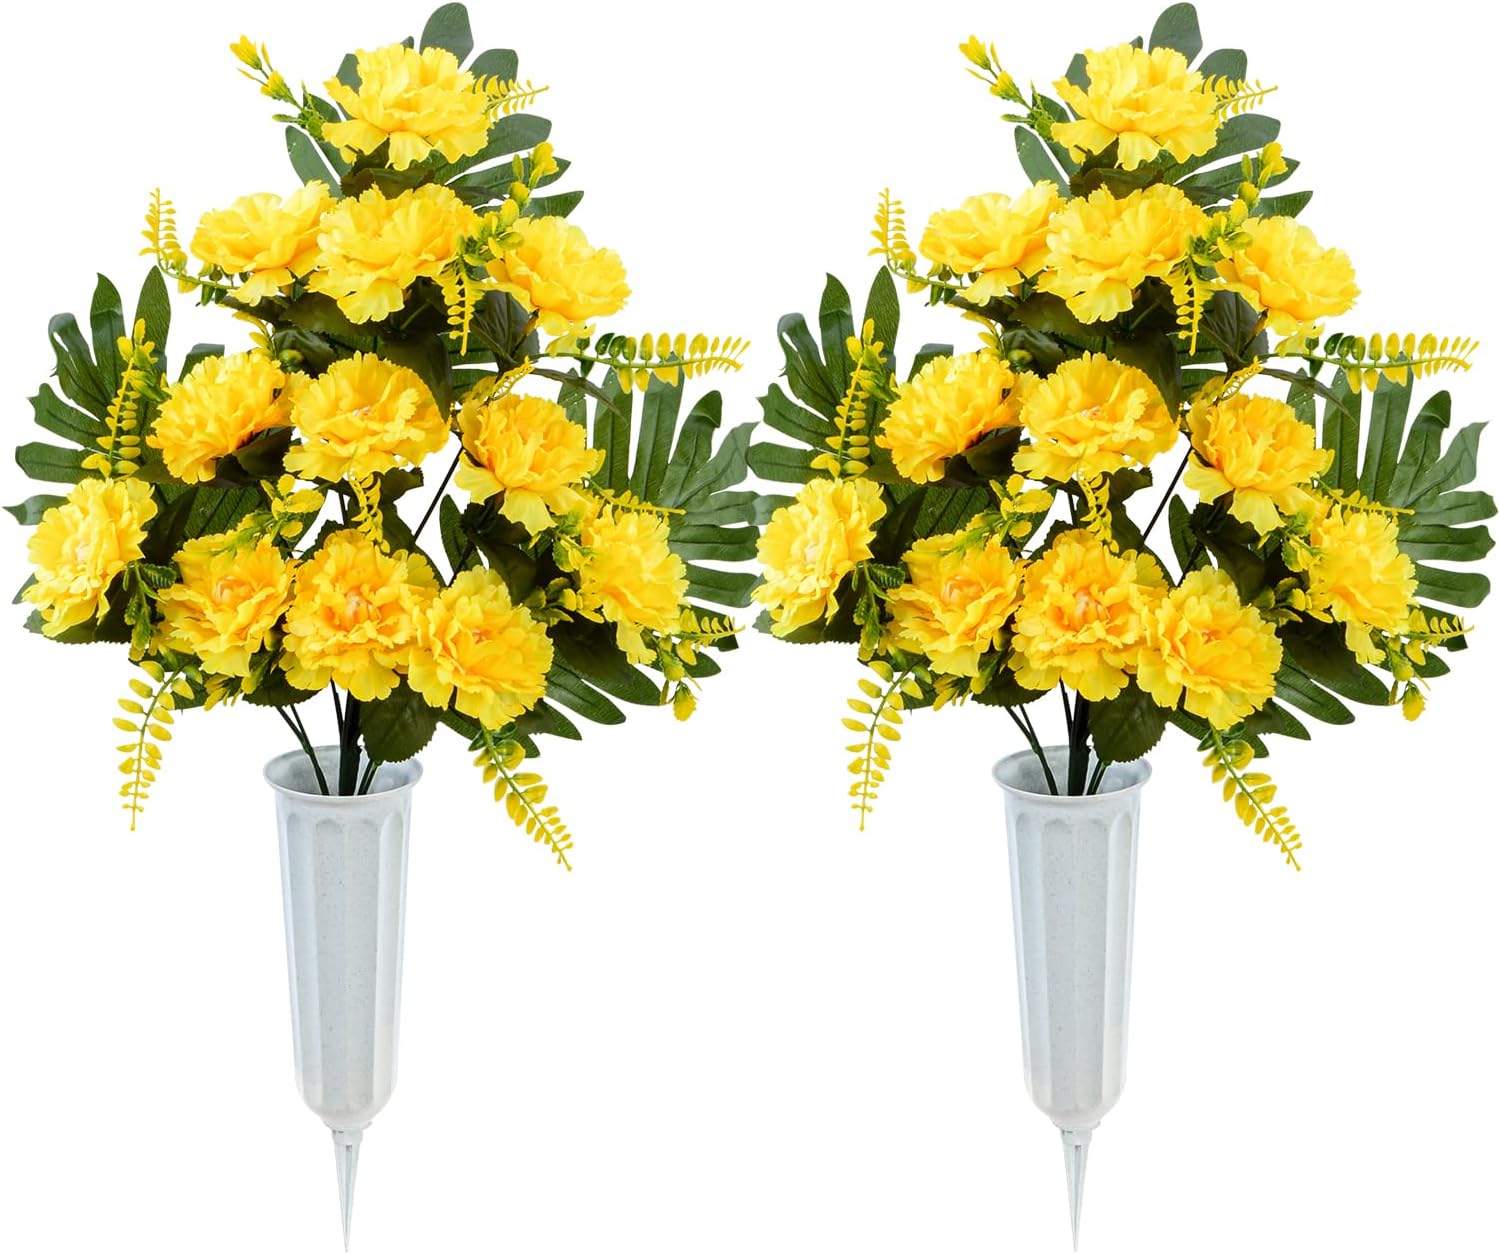 XONOR Artificial Cemetery Flowers for Grave, Set of 2 [...]